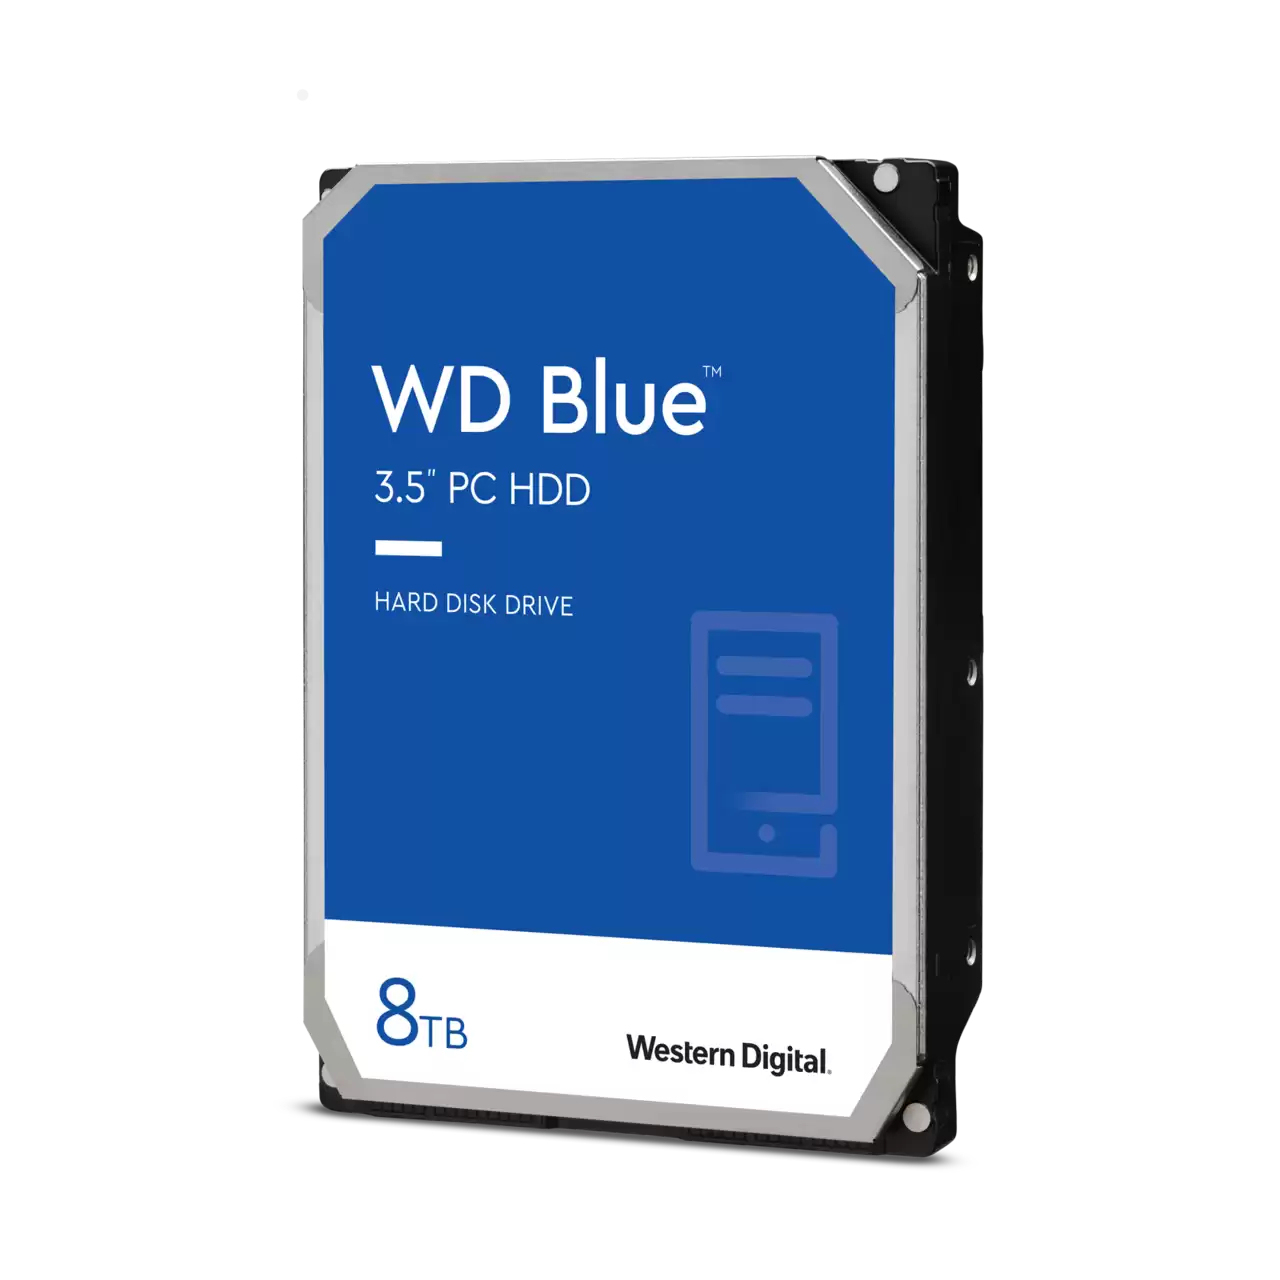 Absorberend Wens globaal Western Digital WD Blue 8TB SATA 6Gb/s HDD internal 3.5inch serial ATA  128MB cache 5640 RPM RoHS compliant Bulk | Staples